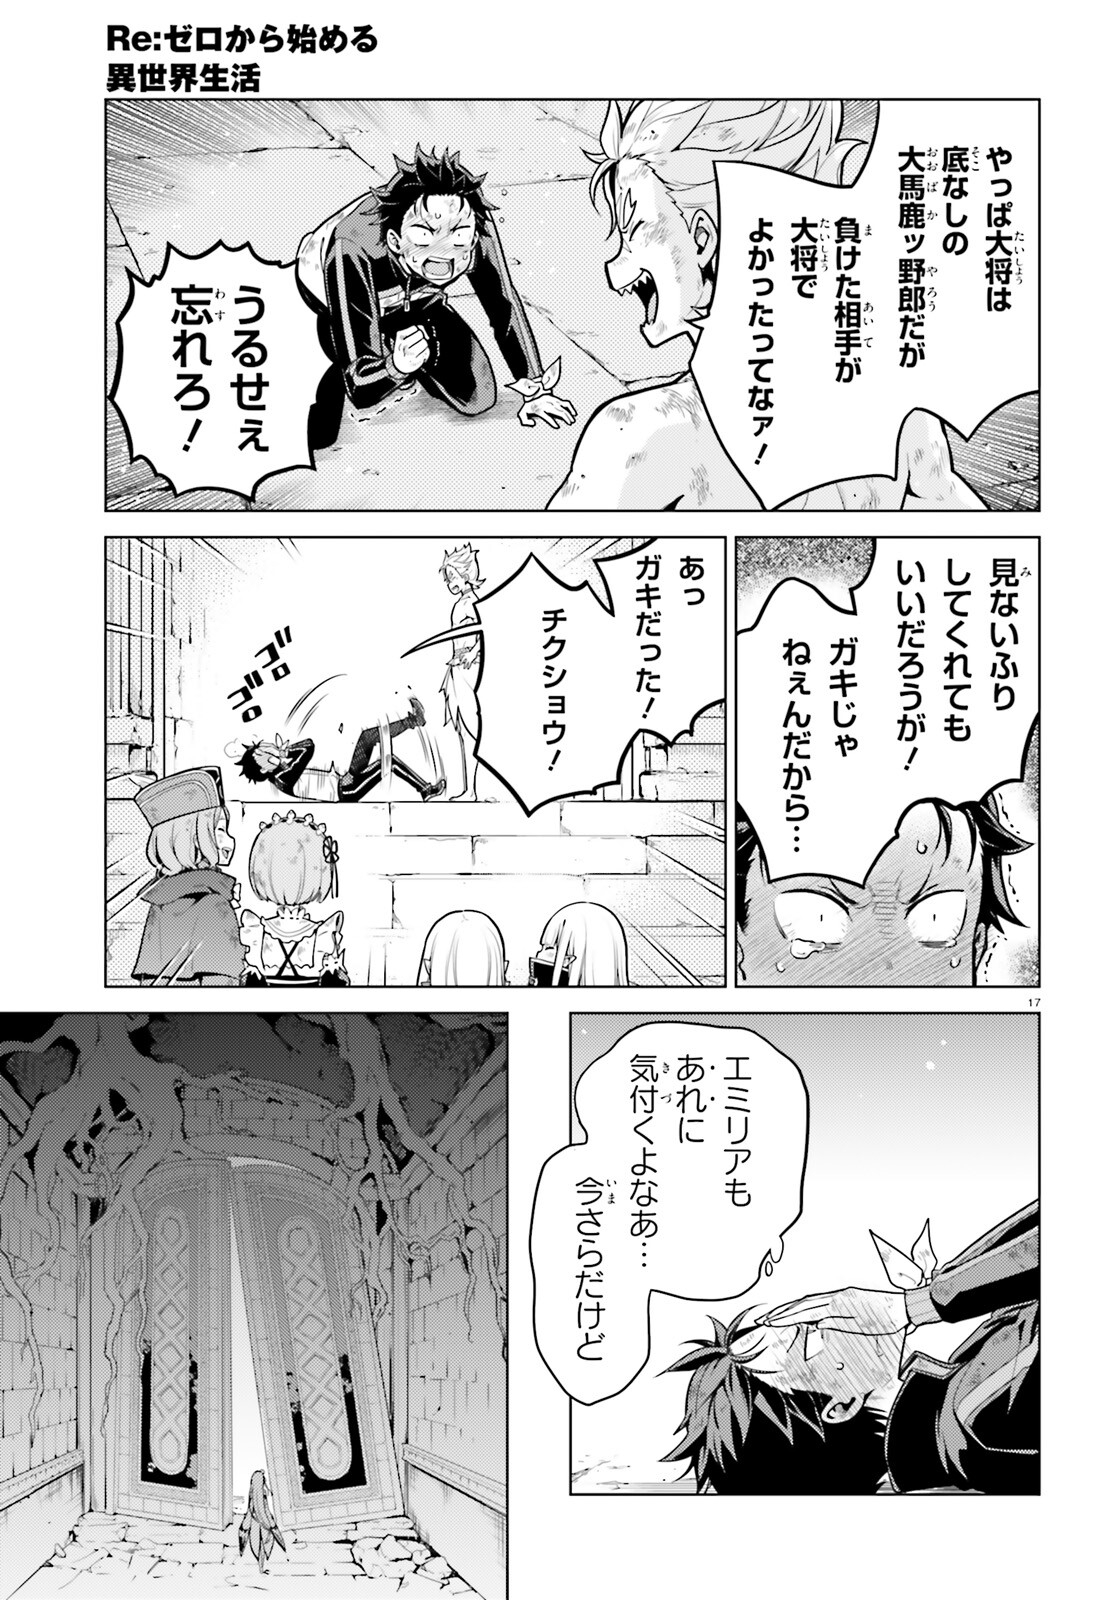 Reゼロから始める異世界生活 第四章 聖域と強欲の魔女 第50話 - Page 17